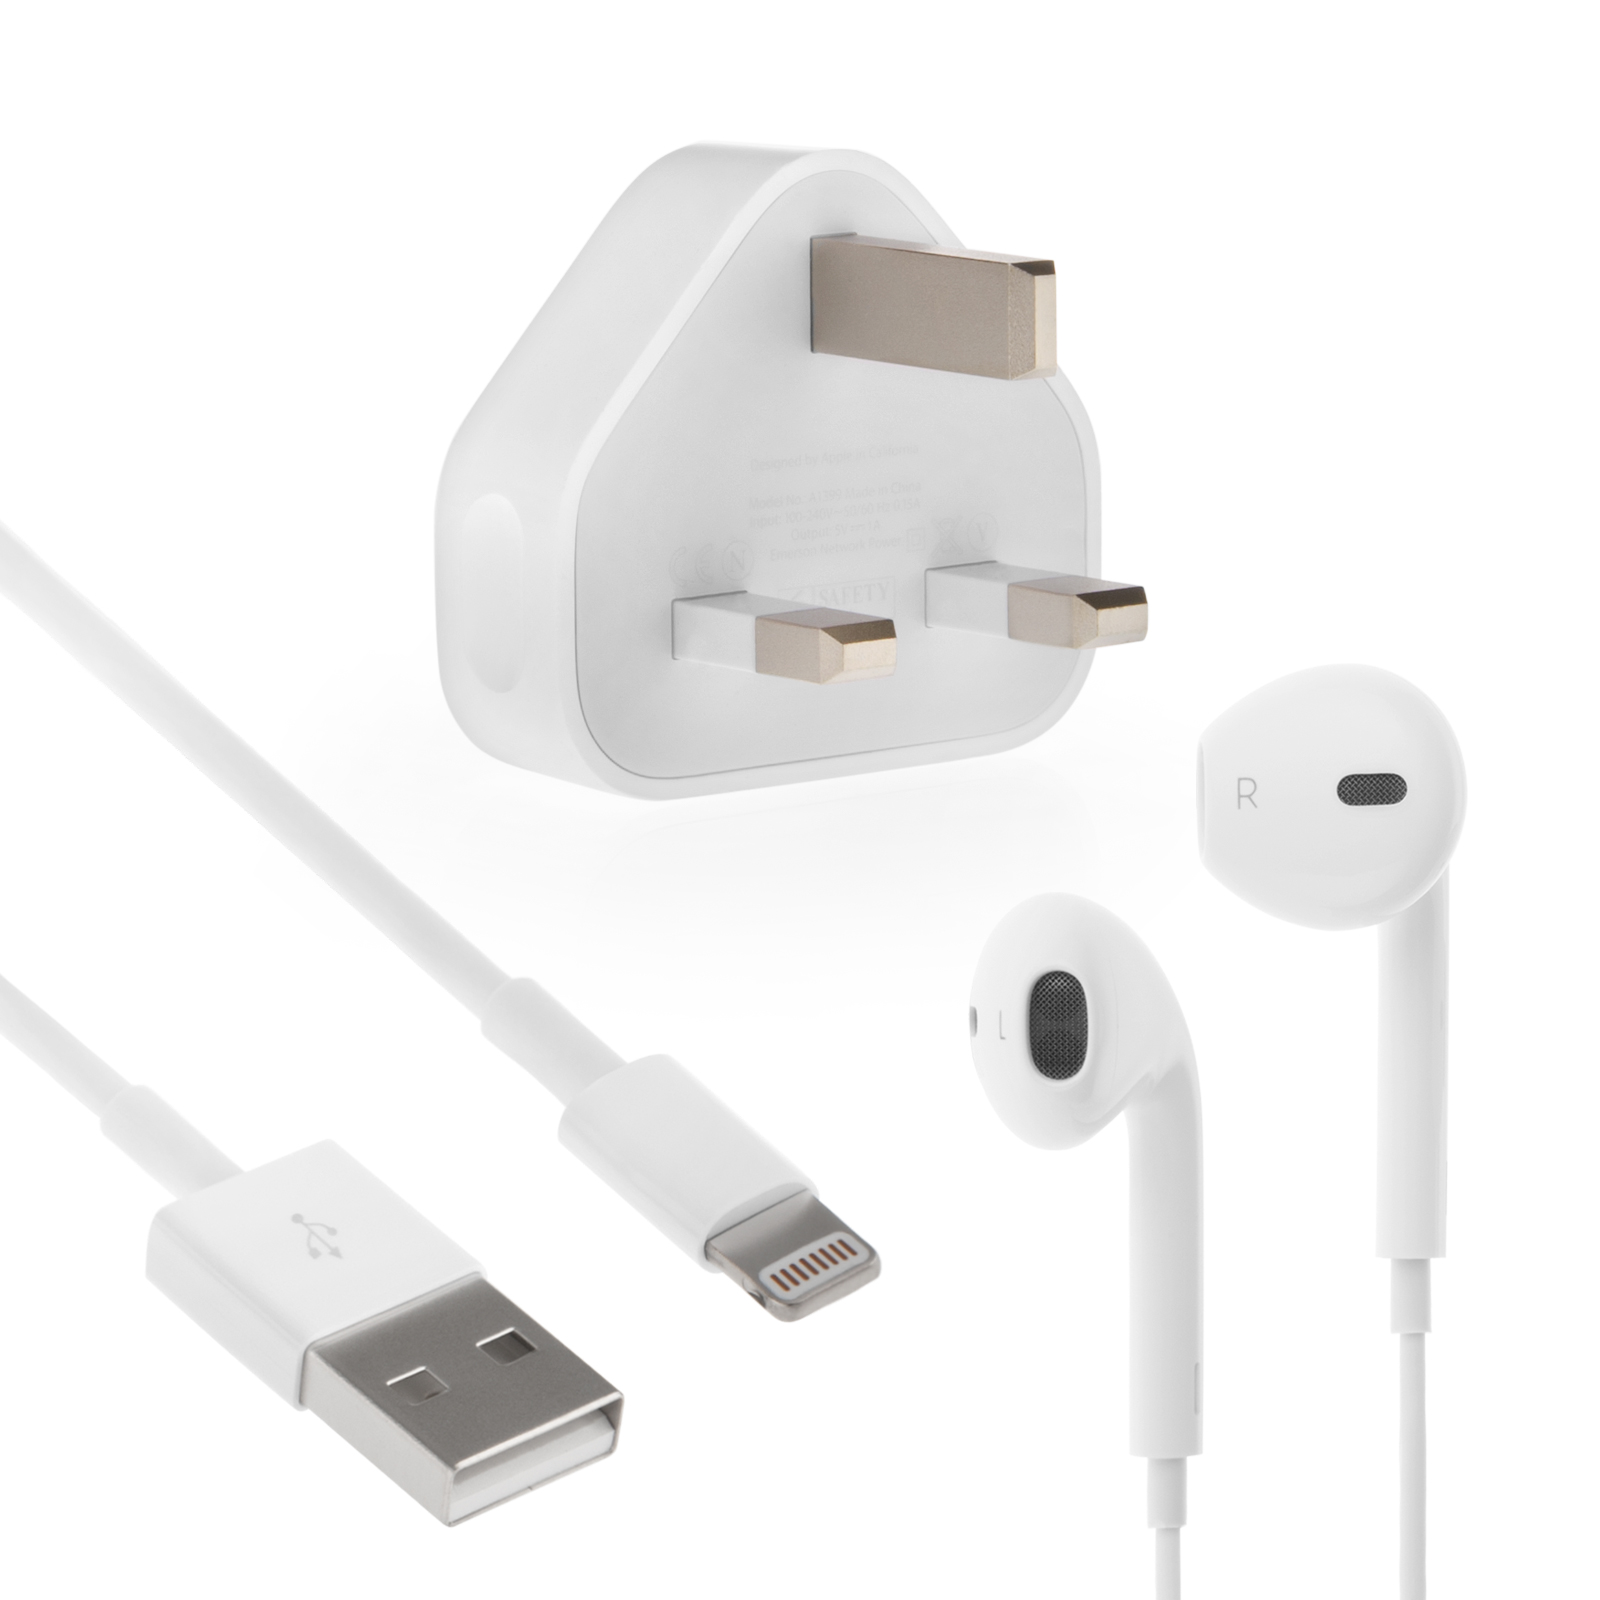 Official Apple EarPods, Adapter and USB Cable Accessory Pack for iPhone 6 Plus and 6s Plus /6s, 6 Plus /6s Plus And iPhone 5,5C & 5S